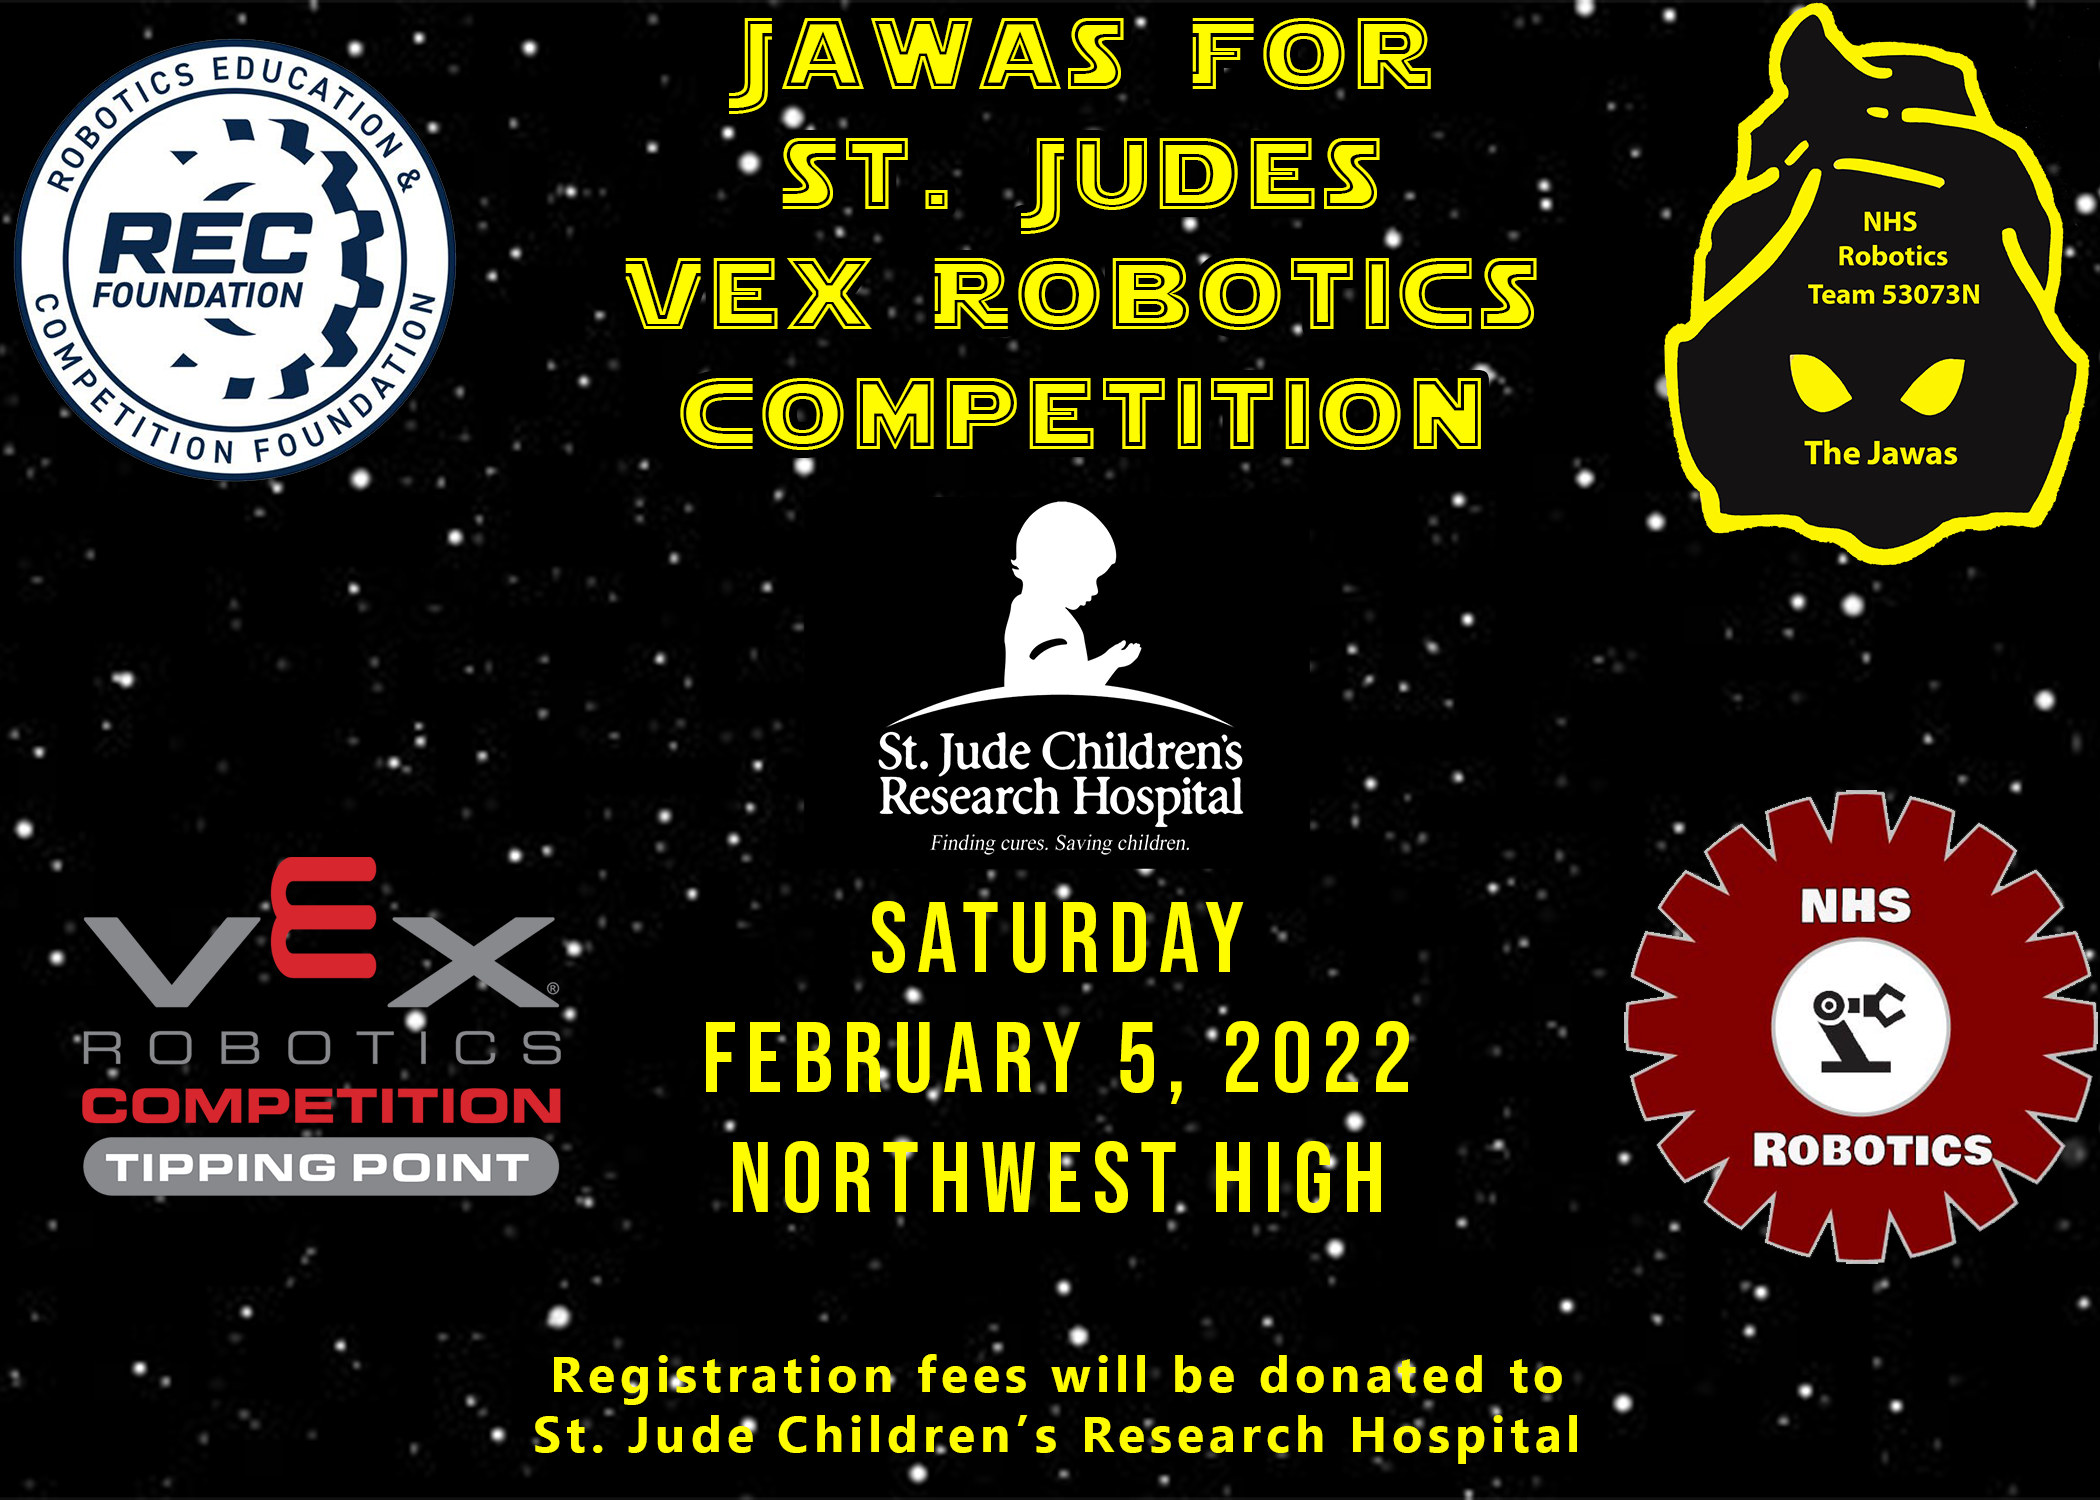 Jawas For St. Jude's Vex Robotics Competition